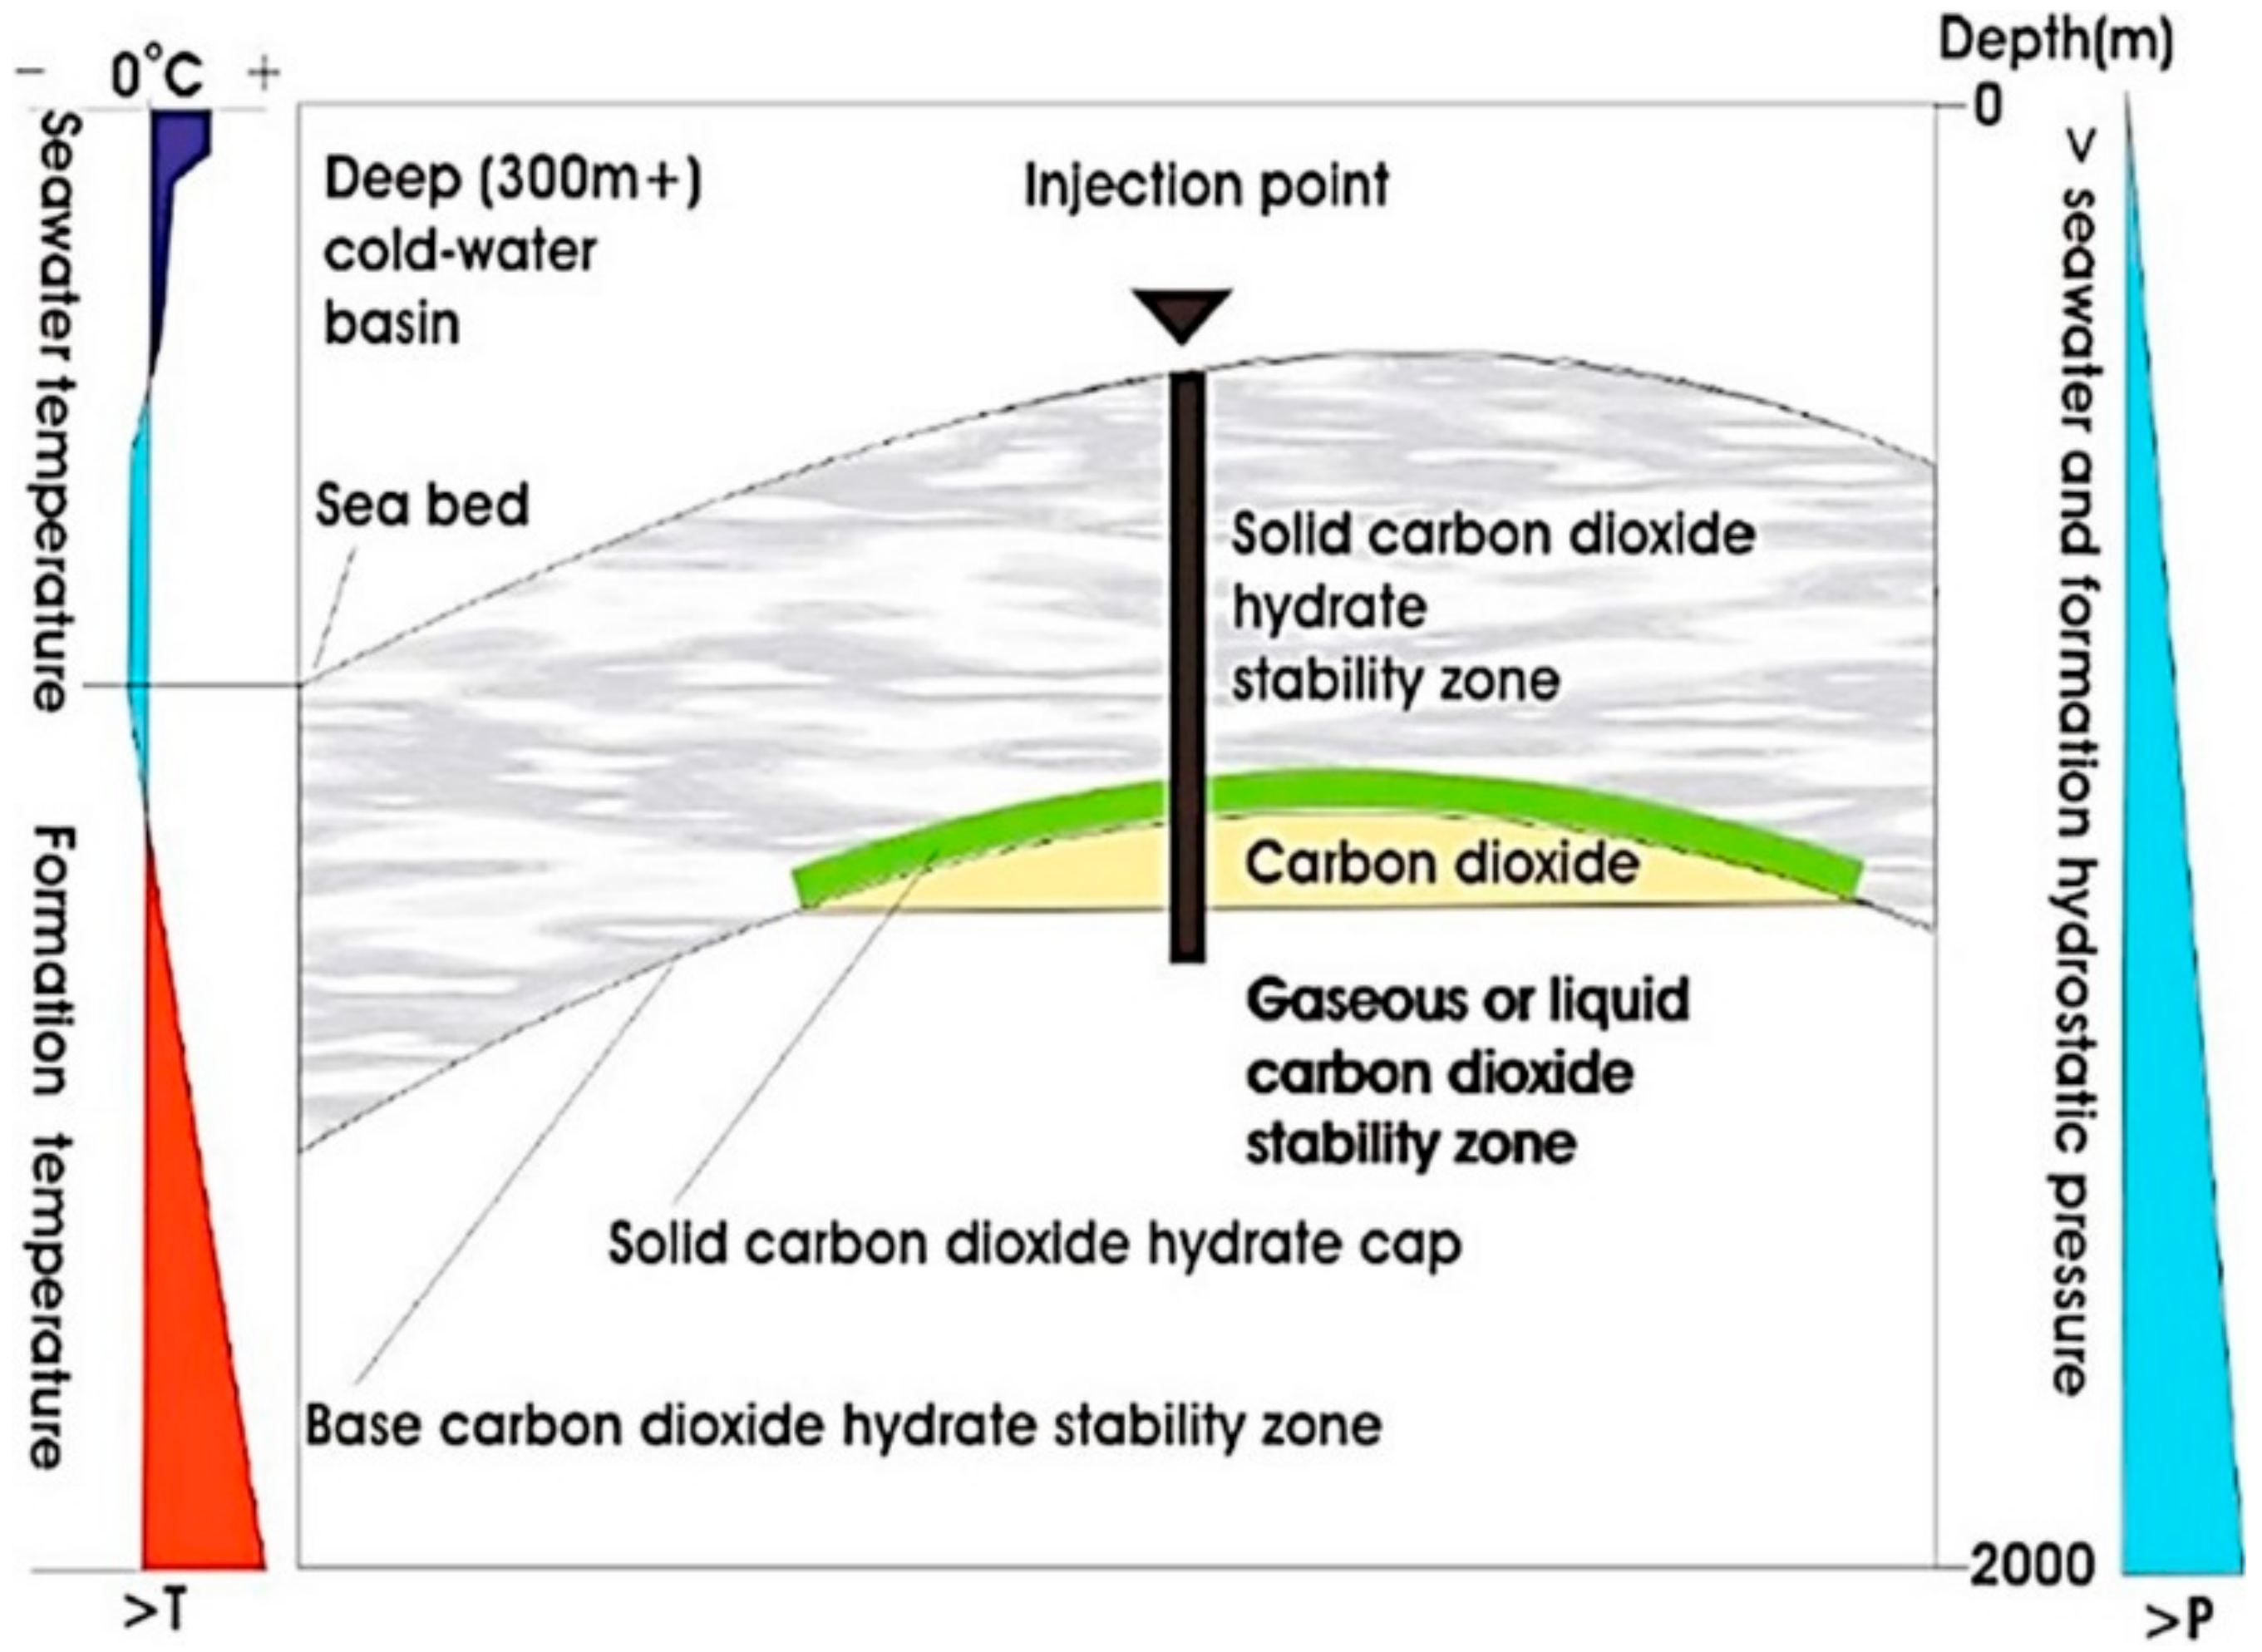 Geosciences | Free Full-Text | A Review of the Studies on  CO2&ndash;Brine&ndash;Rock Interaction in Geological Storage Process | HTML